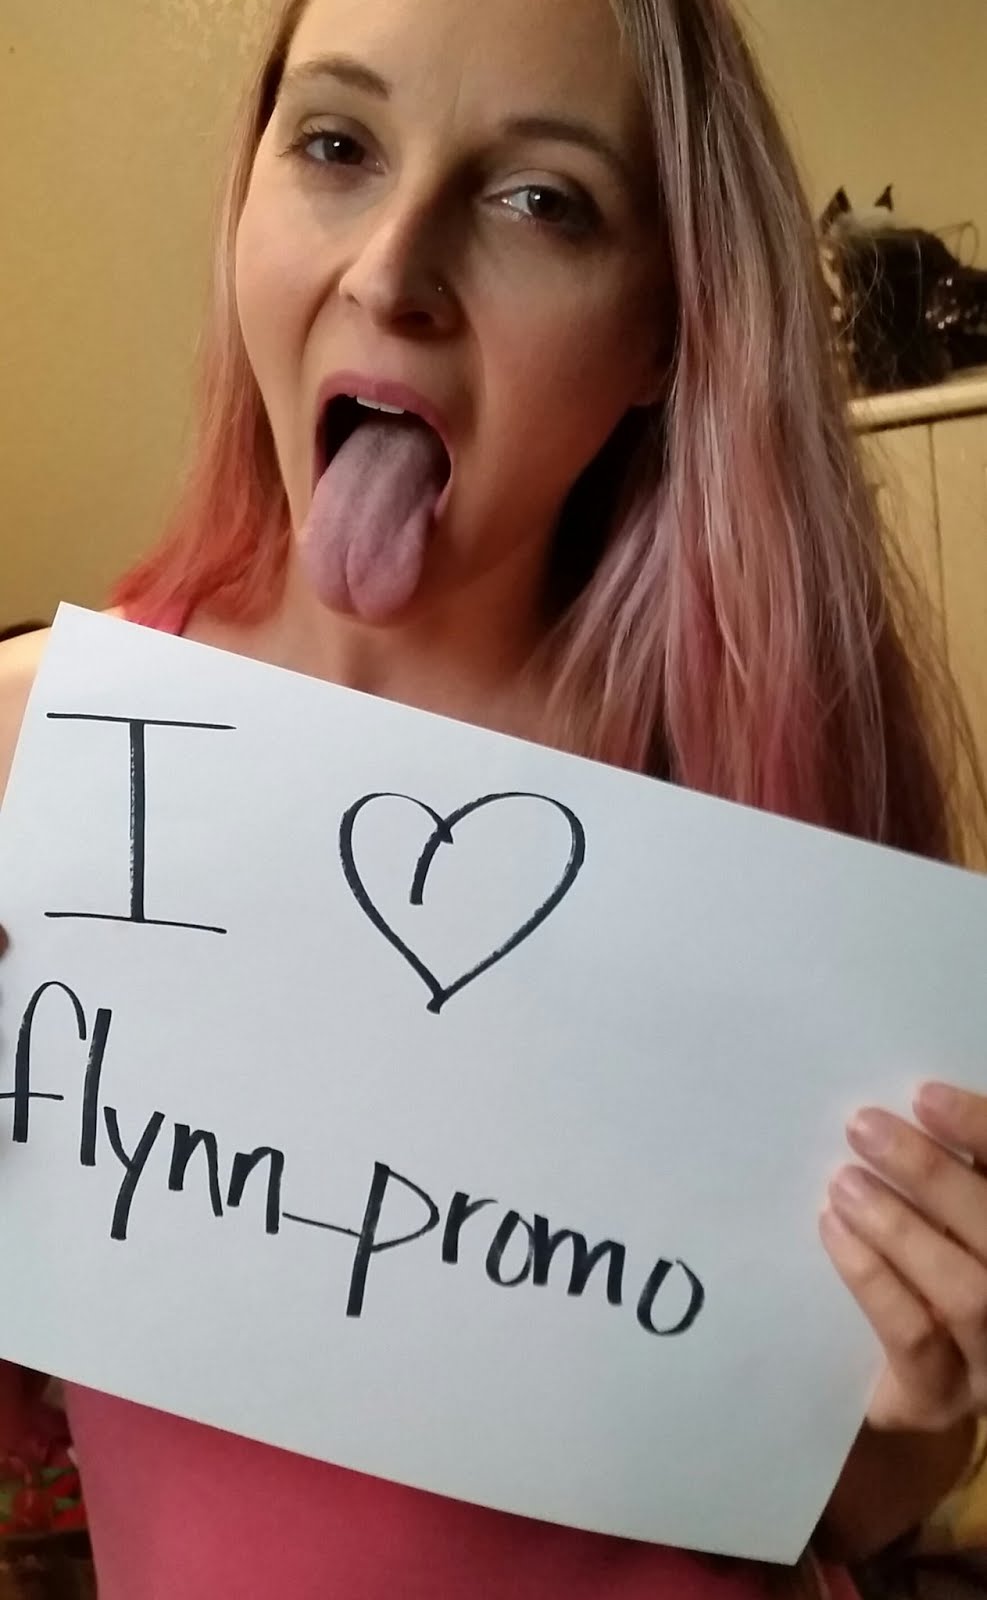 FanSign from the stunning @allieeveknox